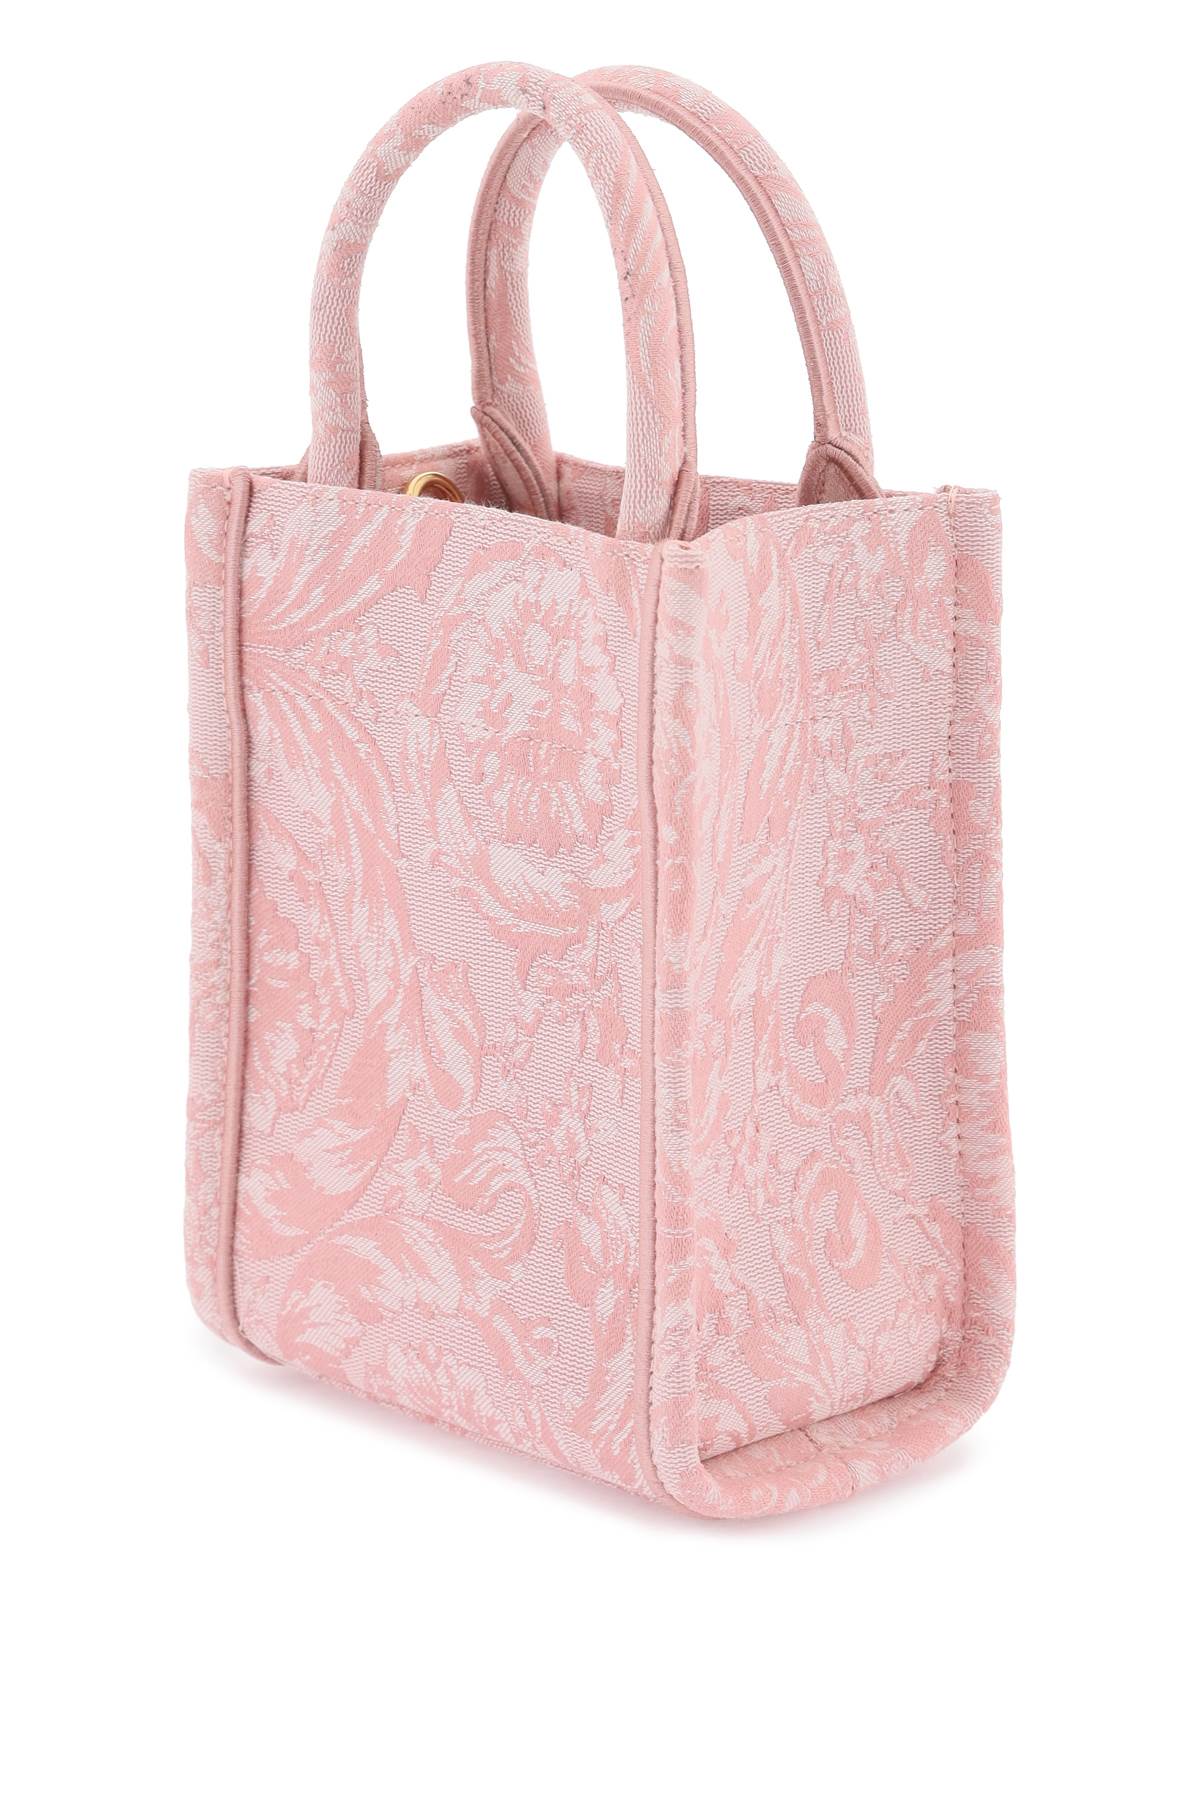 Shop Versace Athena Barocco Mini Tote Bag In Pale Pink English Rose Ve (pink)